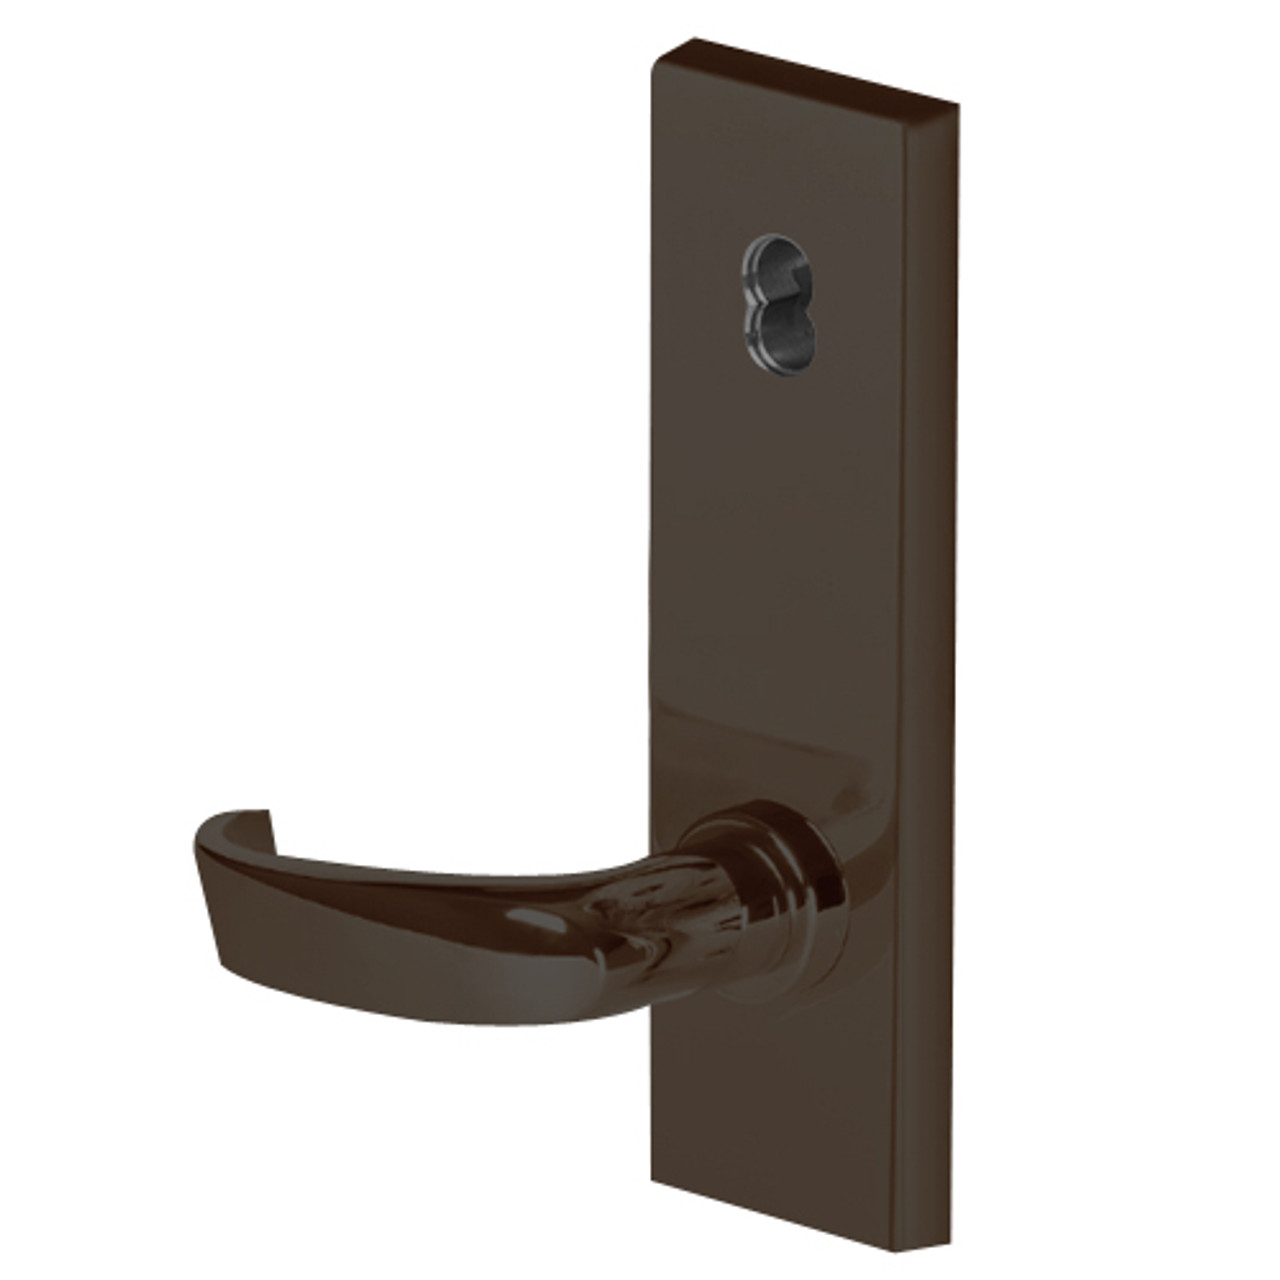 45HW7TDEL14N613 Best 40HW series Single Key Deadbolt Fail Safe Electromechanical Mortise Lever Lock with Curved w/ Return Style in Oil Rubbed Bronze